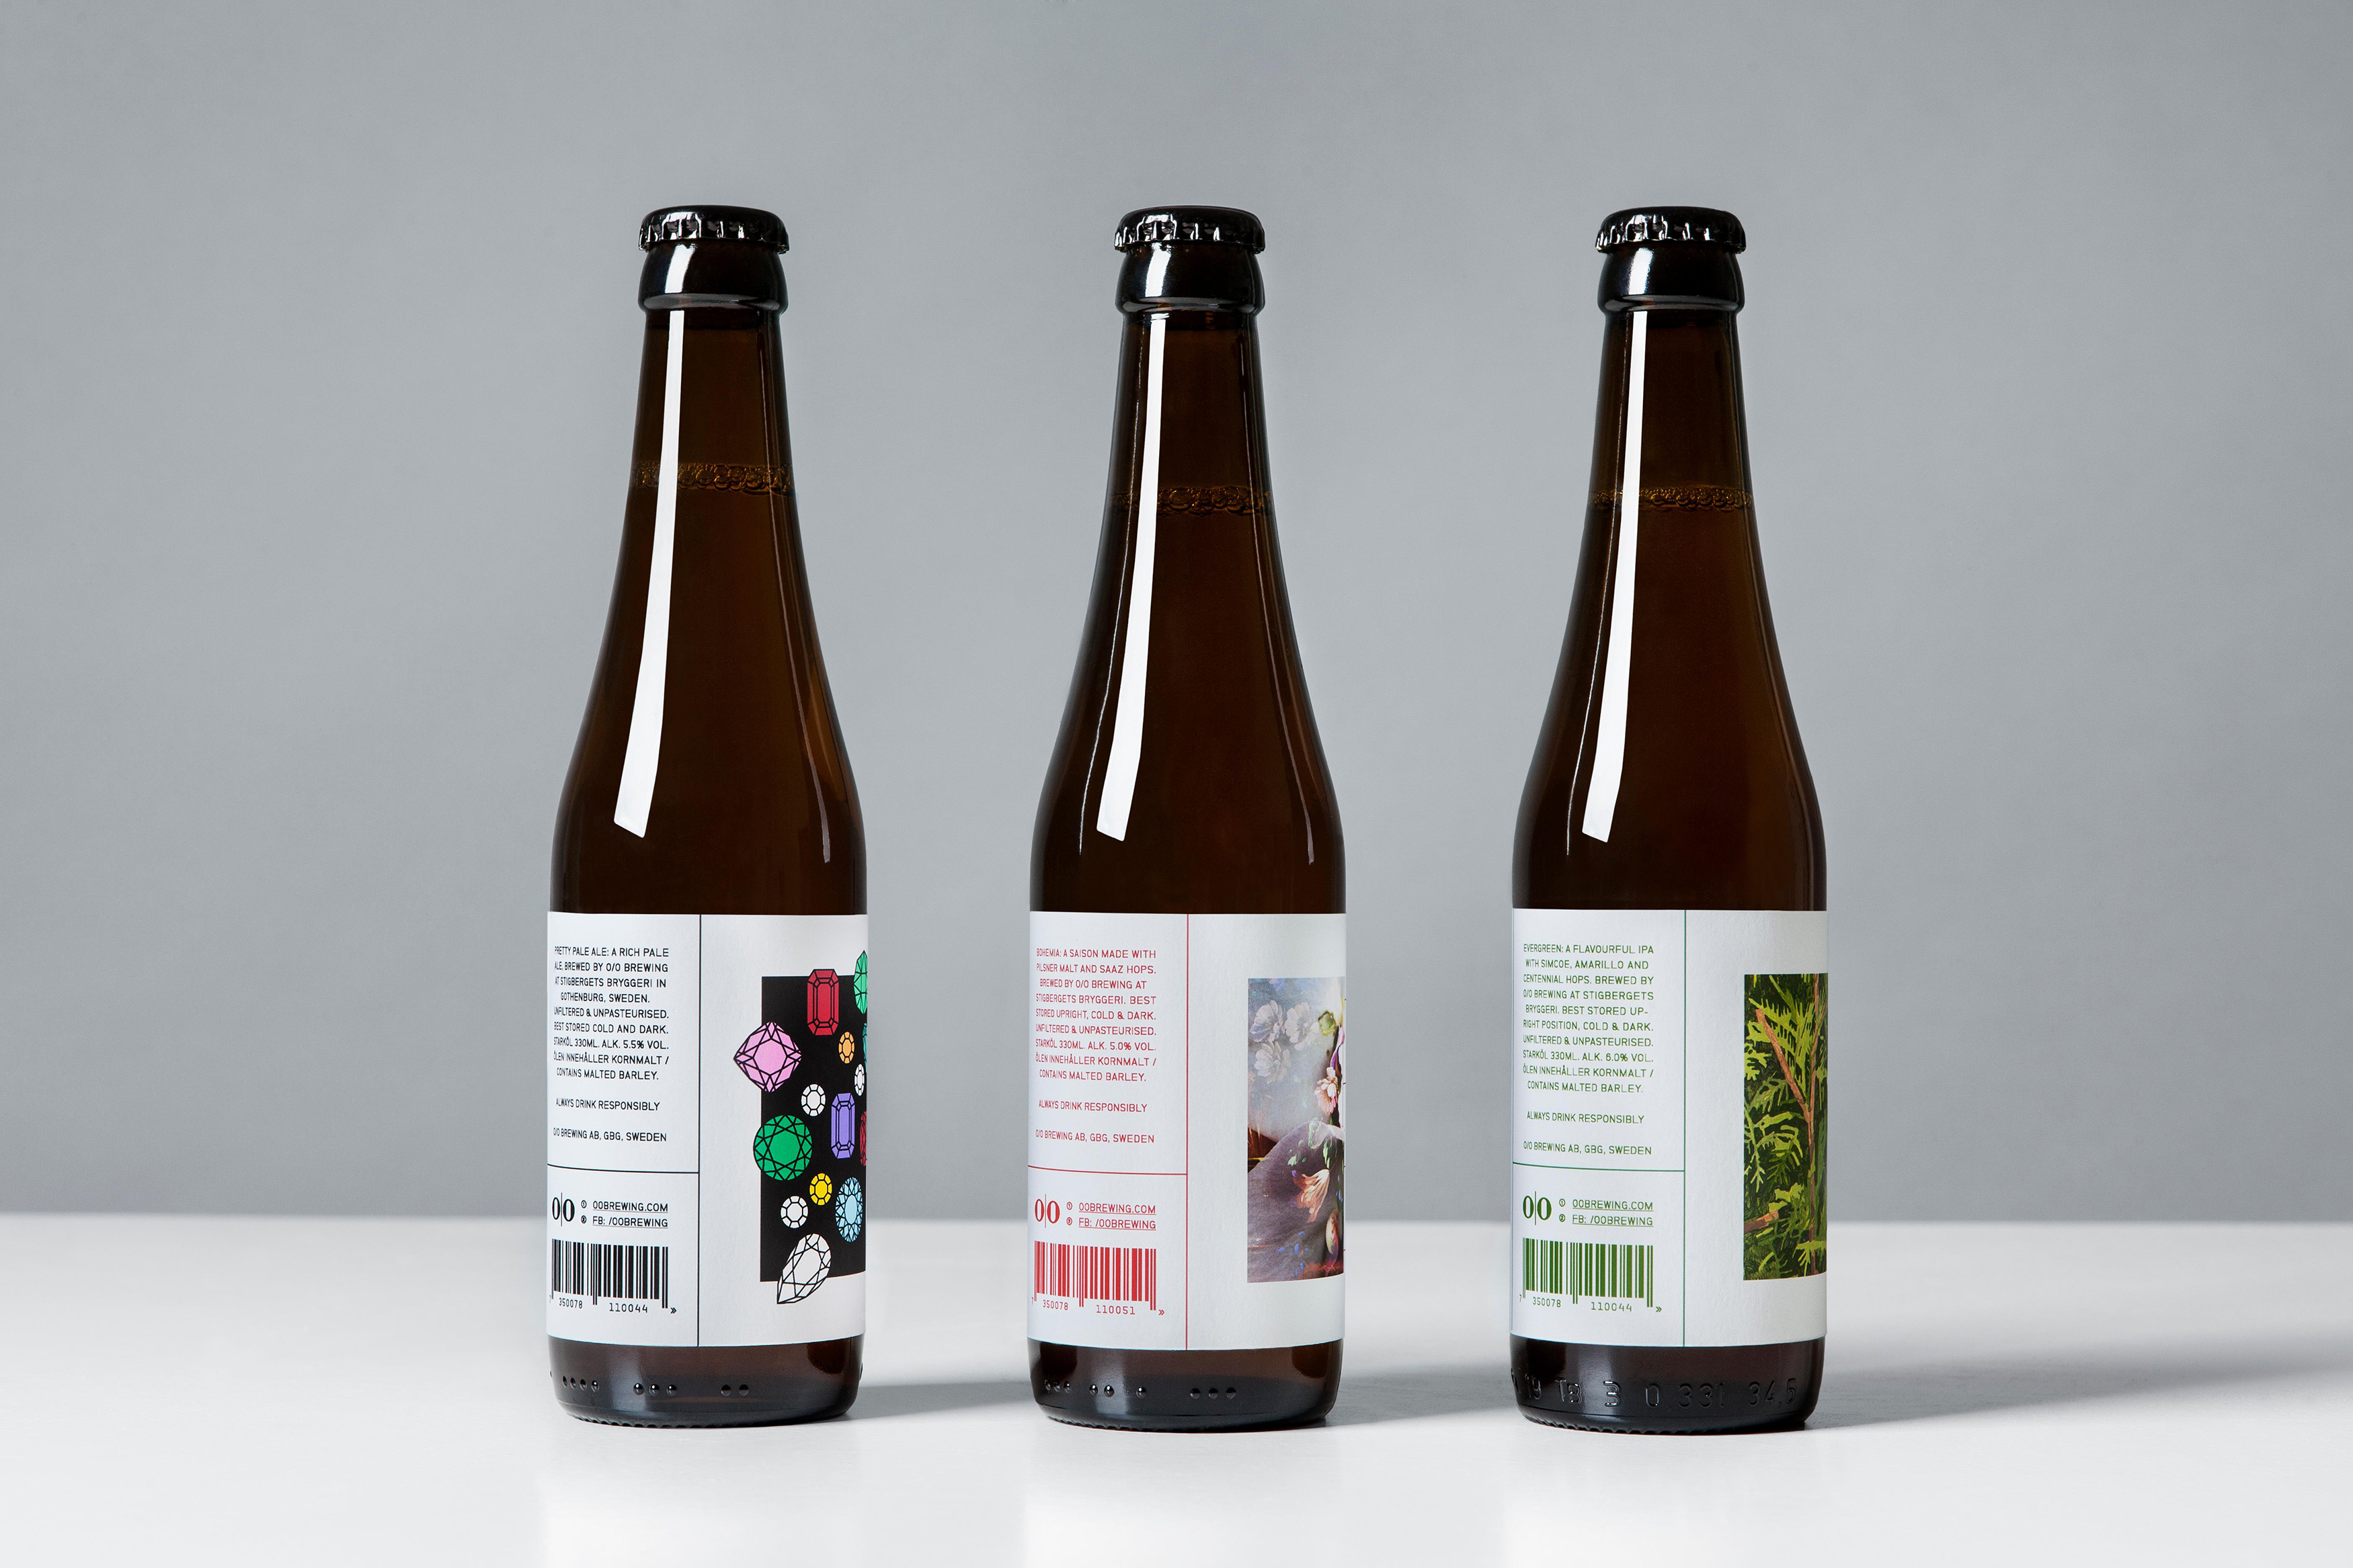 Packaging for O/O Brewing by Swedish graphic design studio Lundgren+Lindqvist